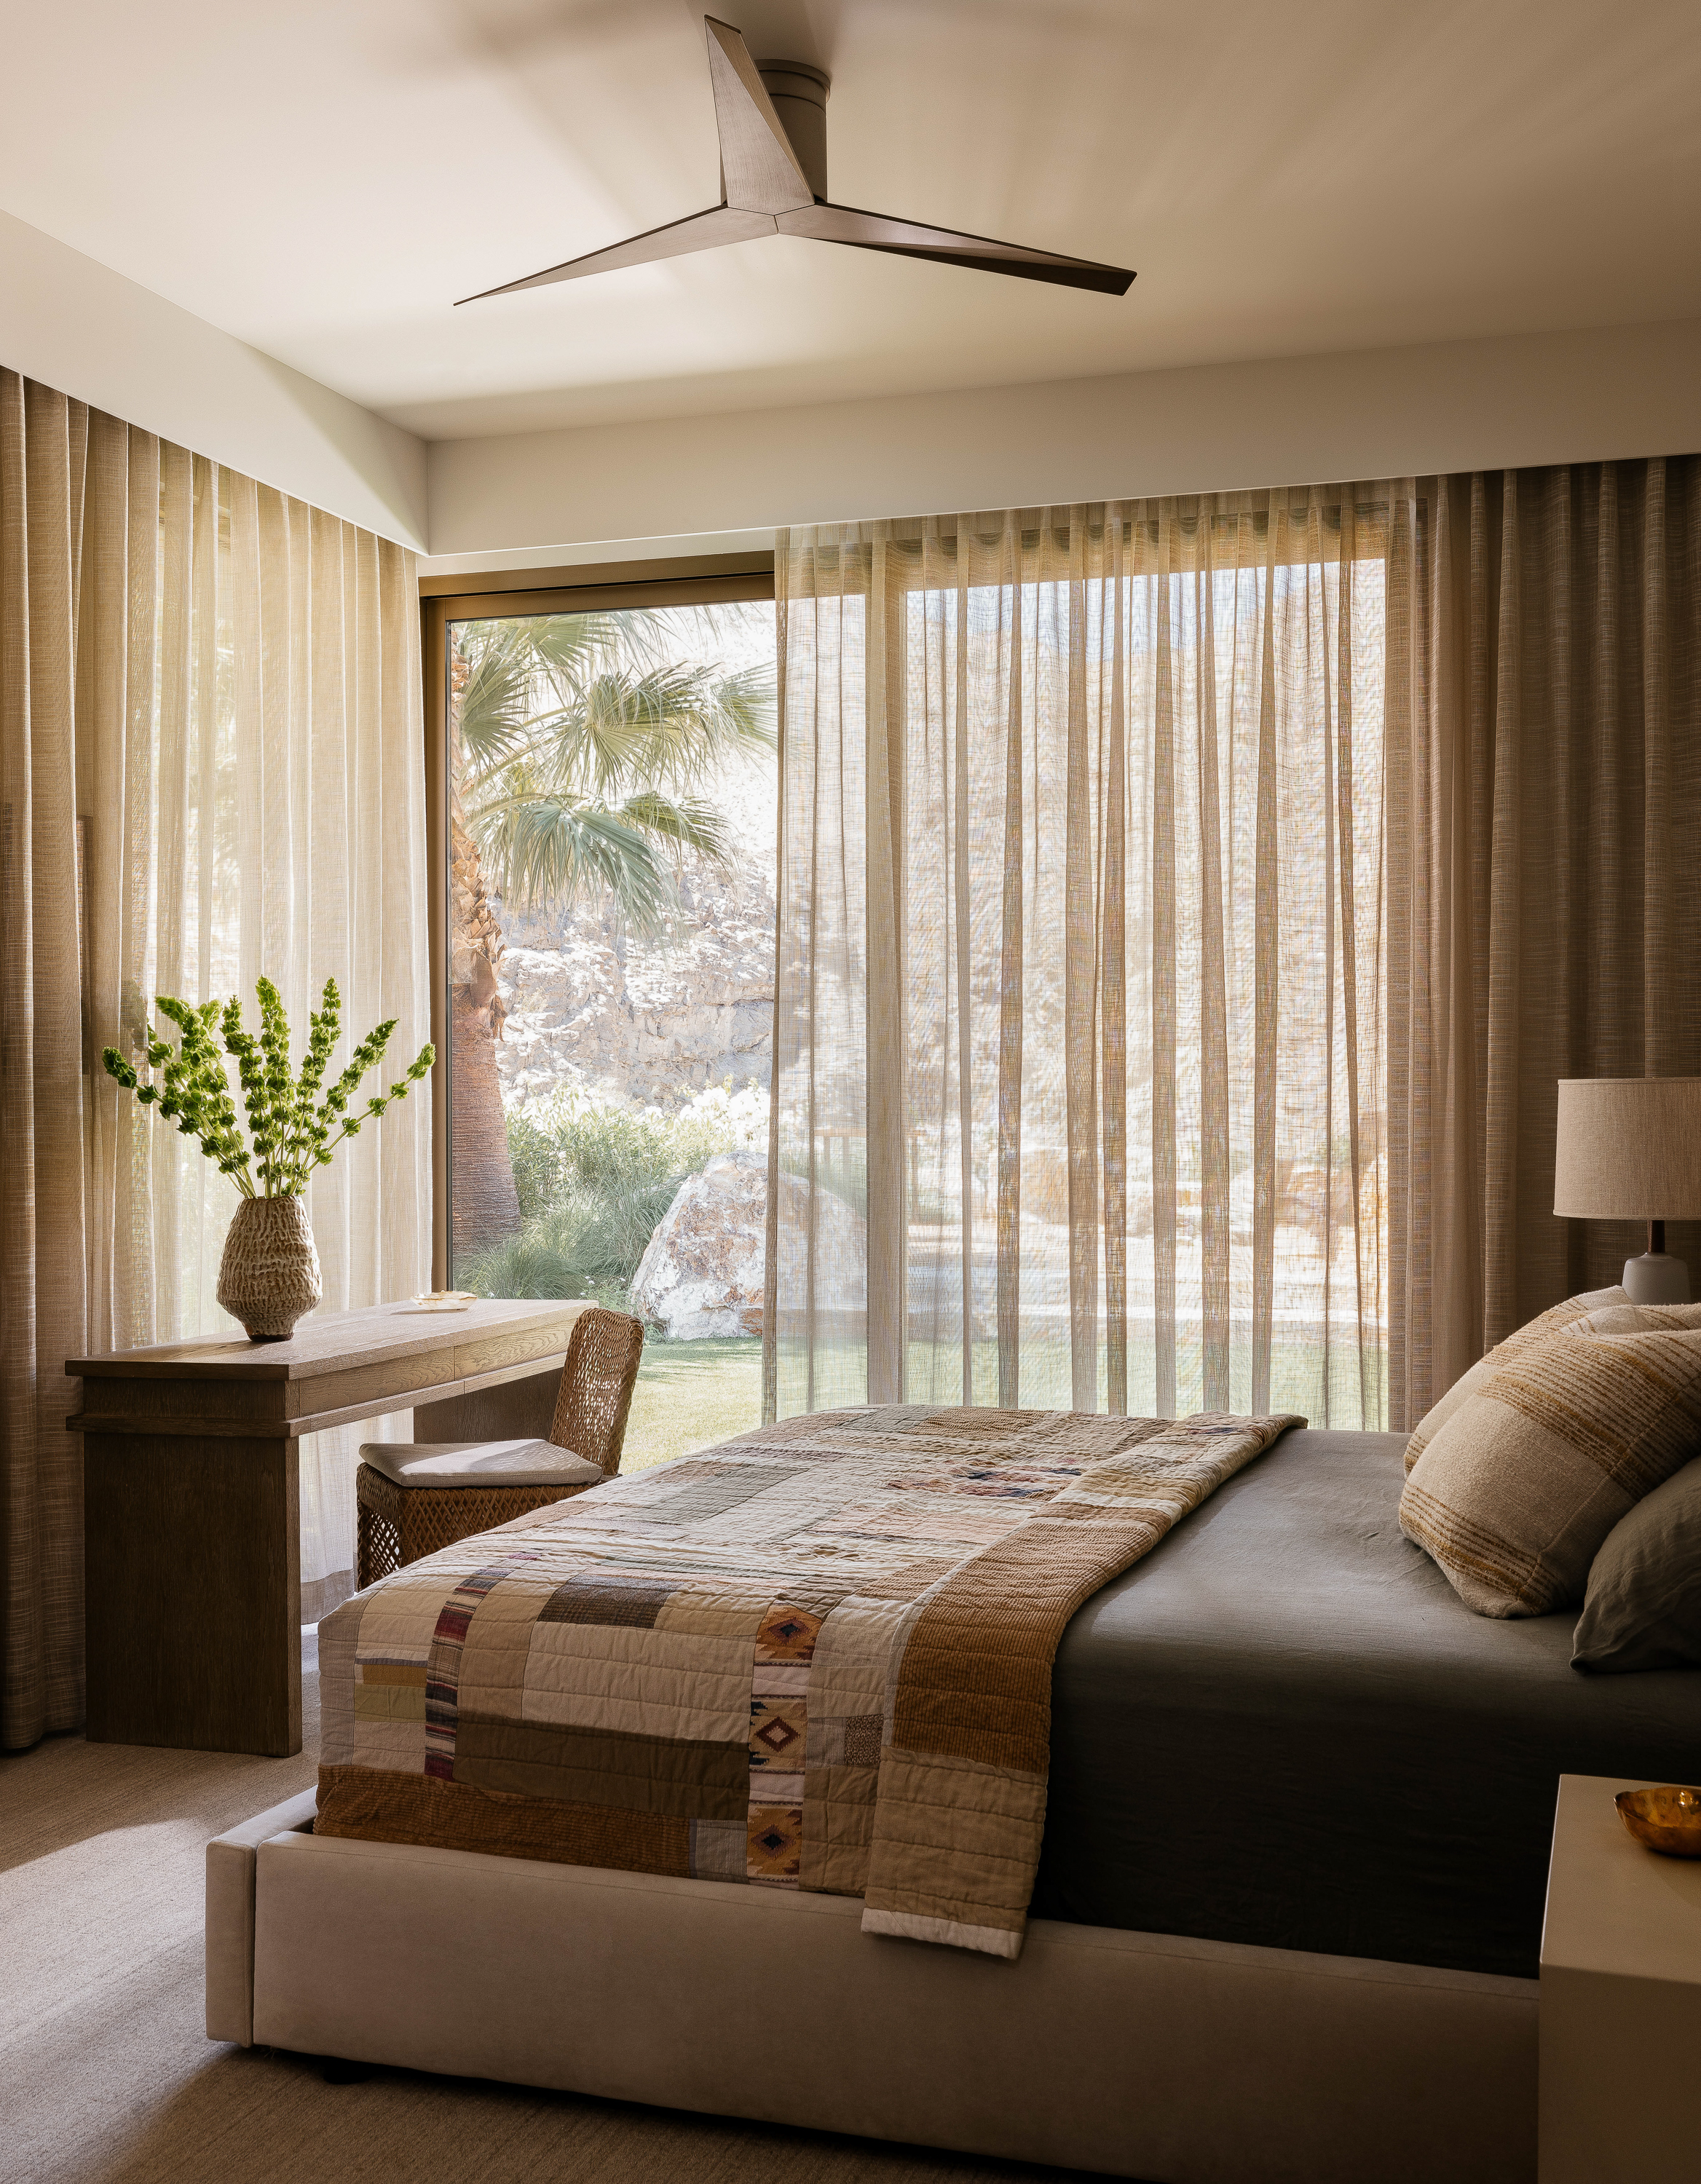 Guest bedroom at Palm Springs Retreat: A serene oasis with luxurious furnishings and desert-inspired accents, offering a peaceful retreat for visitors.